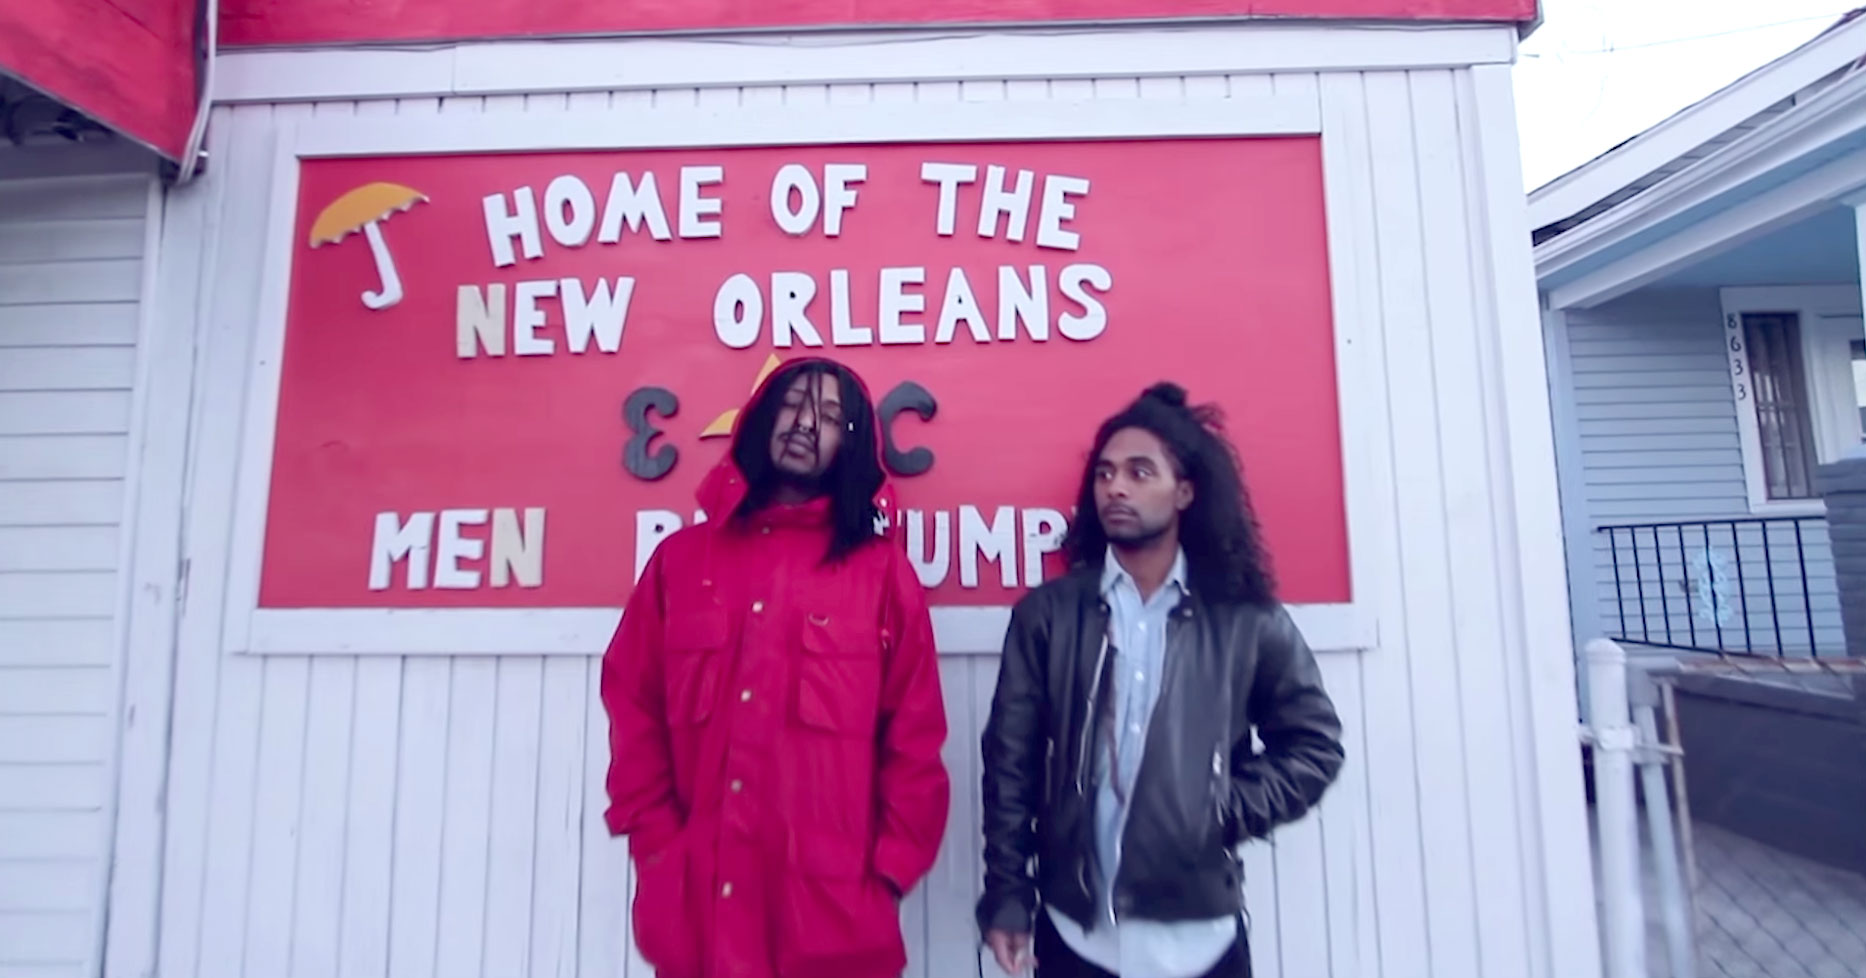 Video: Cavalier — “Bywater Blue”Produced by Iman Omari